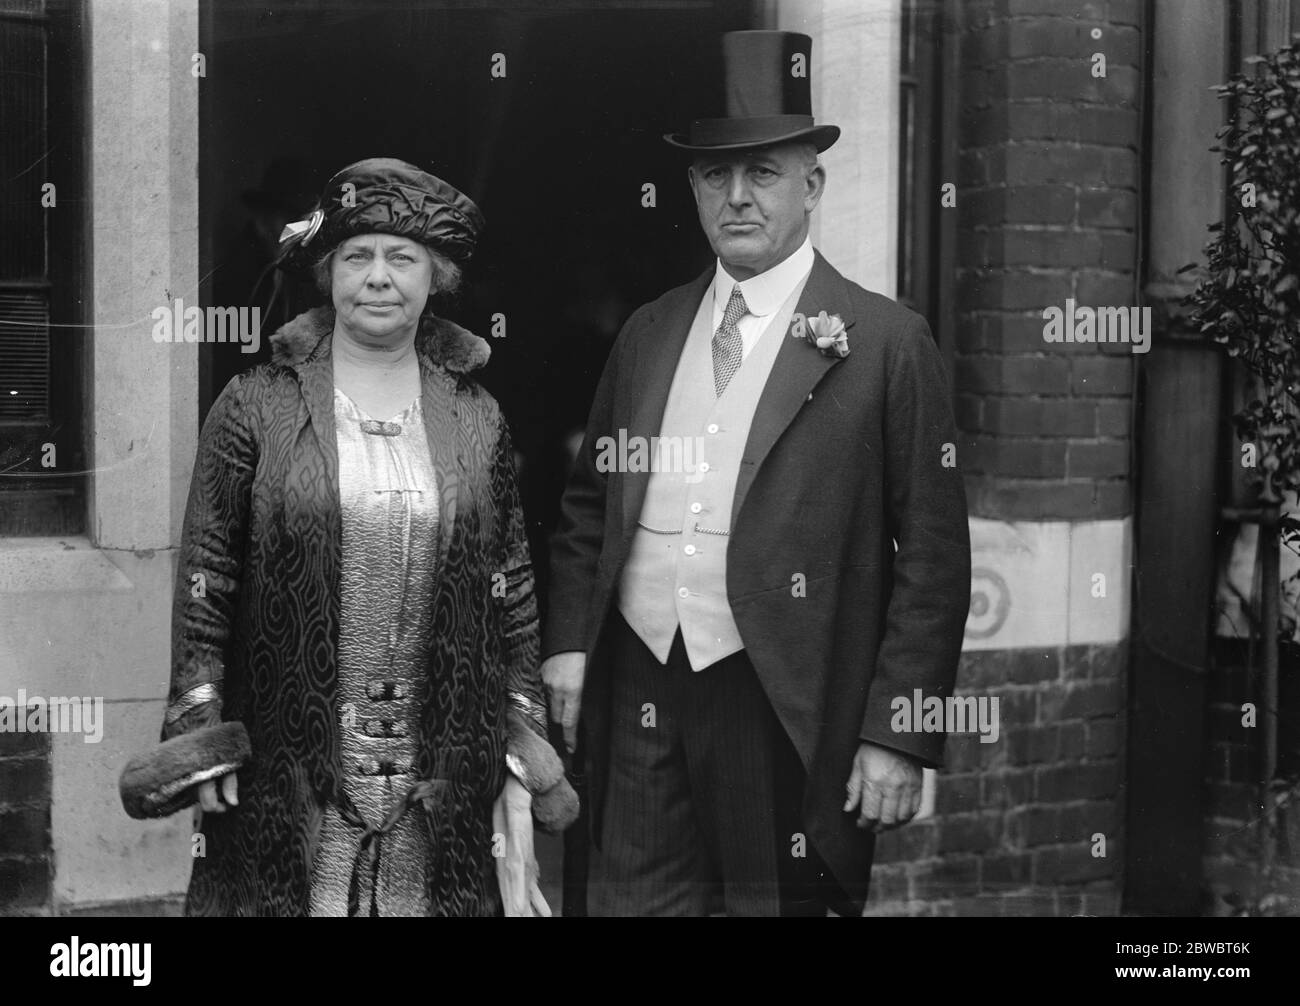 Ex M P Weds at 58 . Sir THomas Robert Bathell , ex M P , for the Malden Division of Essex , was married to Miss E L Tabor at Kensington Register Office . Bride and bridegroom . 5 November 1925 . Stock Photo